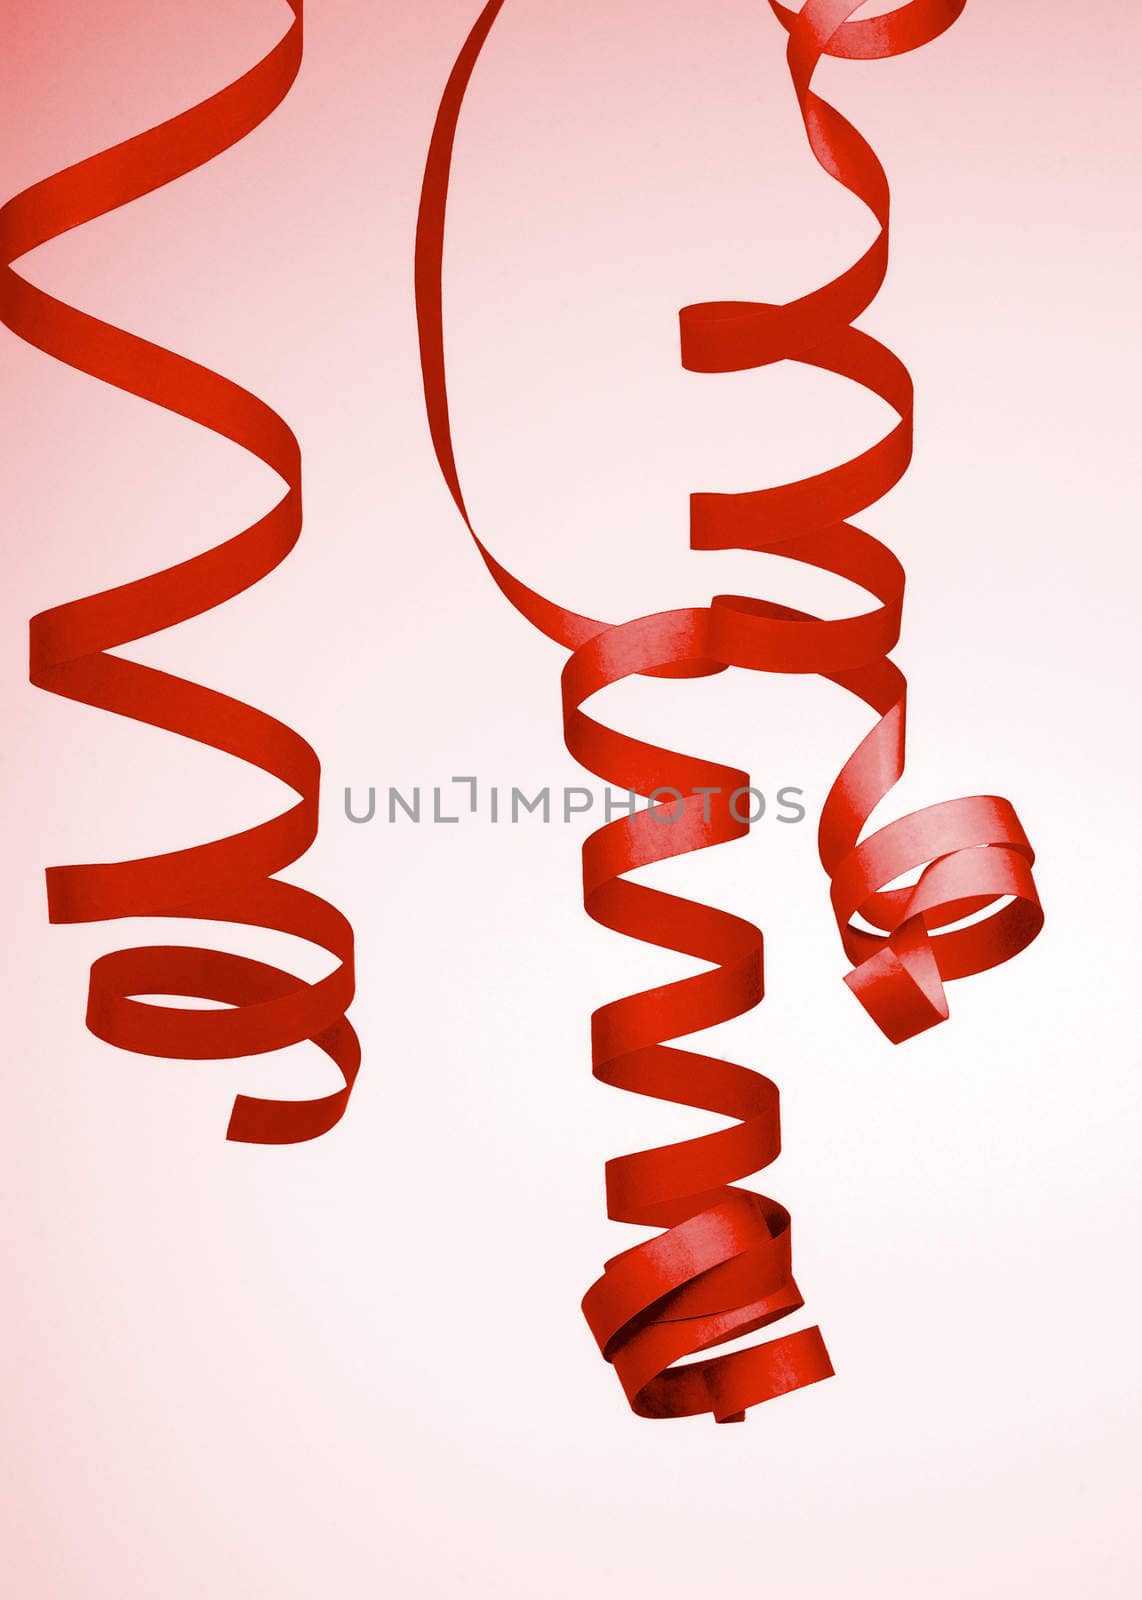 Three Red Curled Party Streamers isolated on Toned background